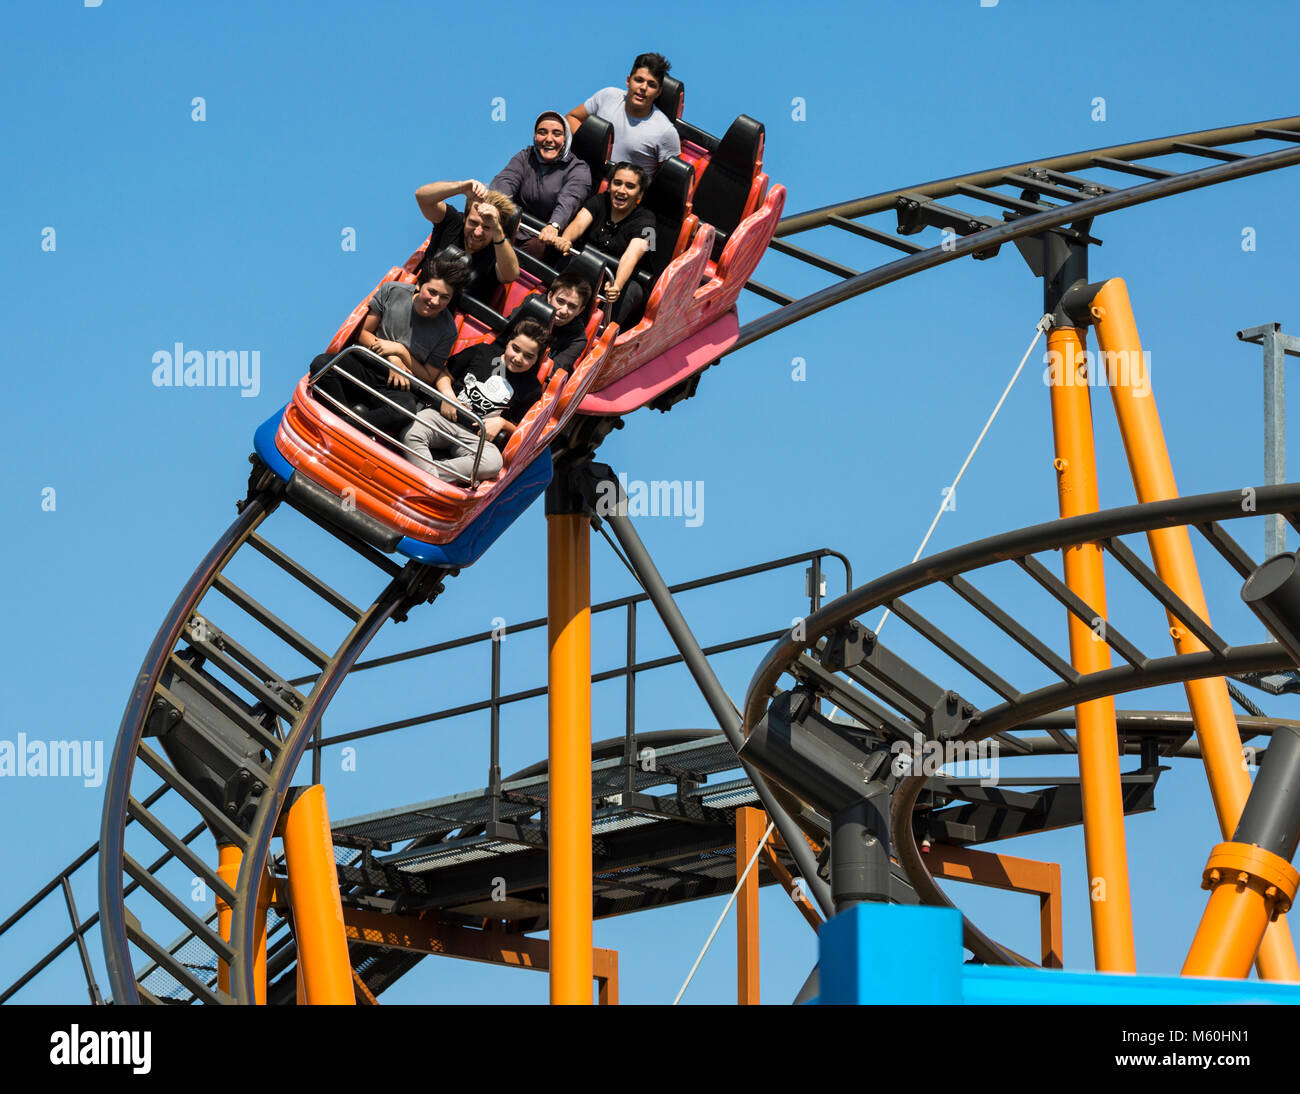 Rollercoaster High Resolution Stock Photography And Images Alamy